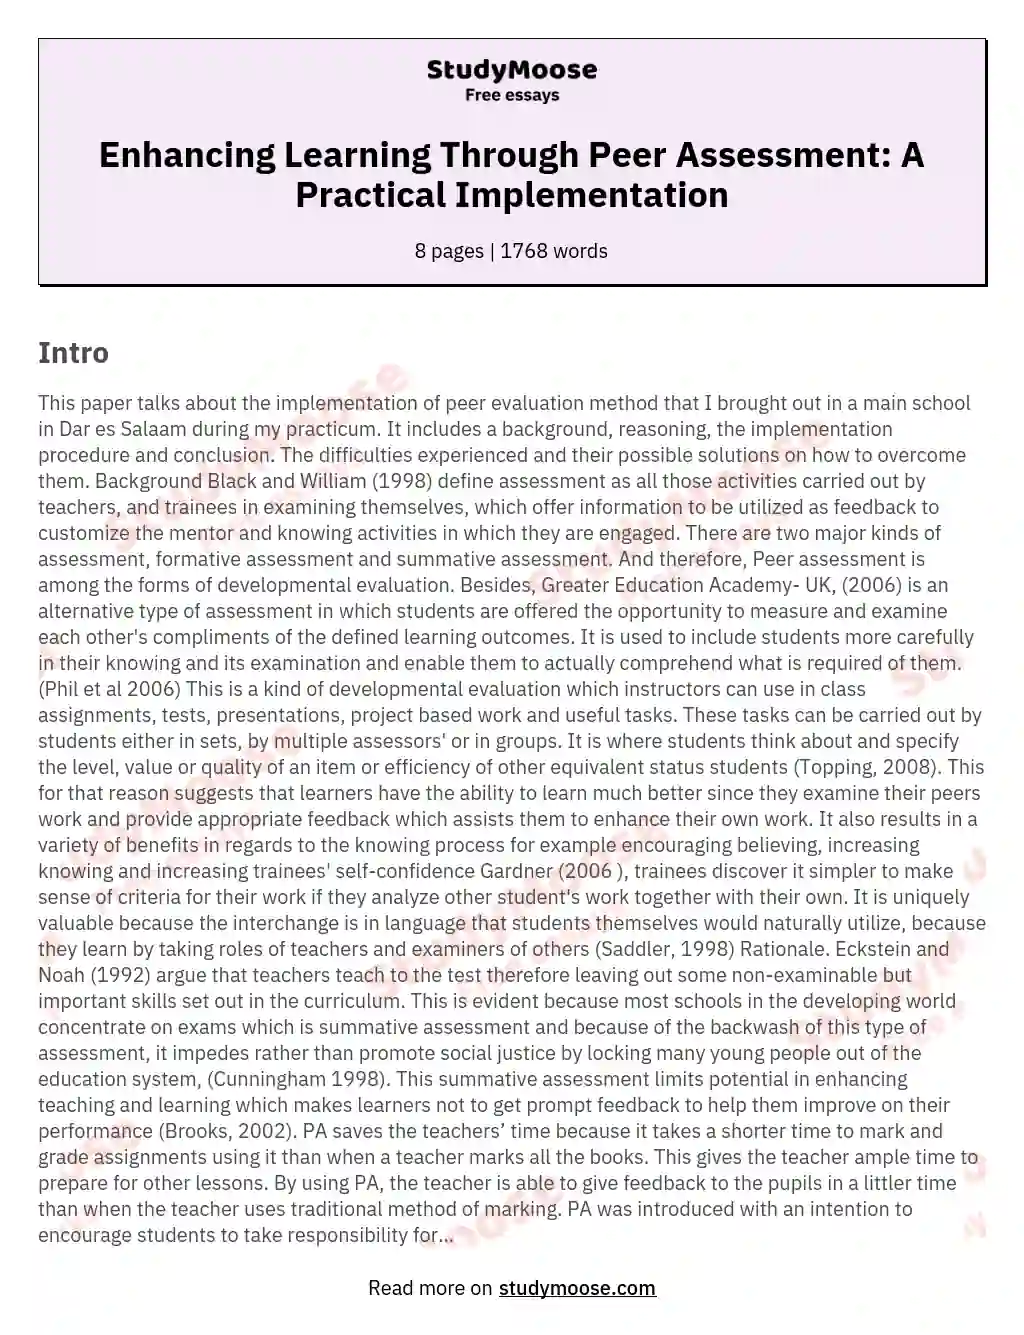 Enhancing Learning Through Peer Assessment: A Practical Implementation essay